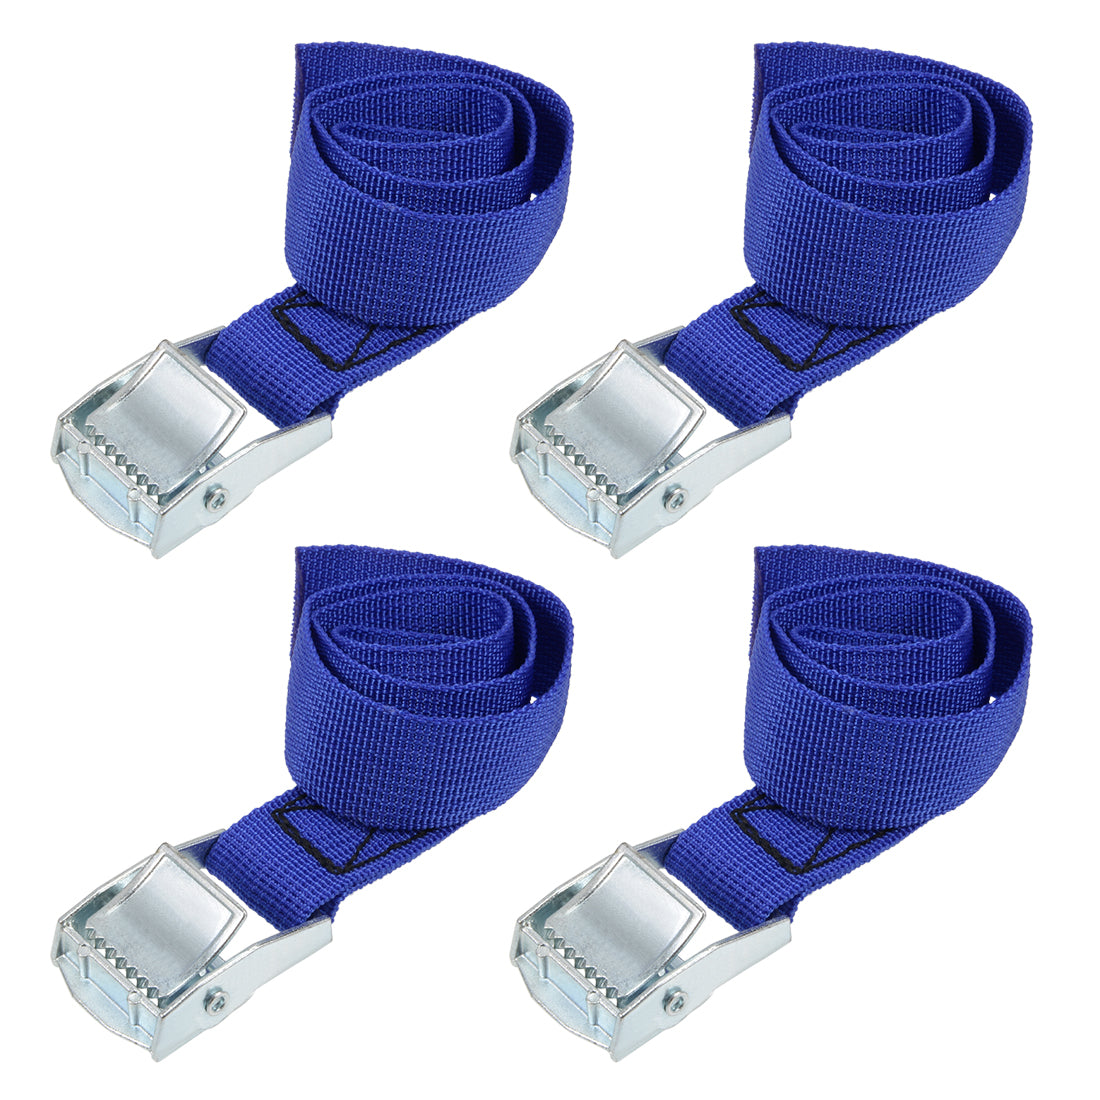 uxcell Uxcell 0.5M x 25mm Lashing Strap Cargo Tie Down Straps w Cam Lock Buckle 250Kg Work Load, Blue, 4Pcs